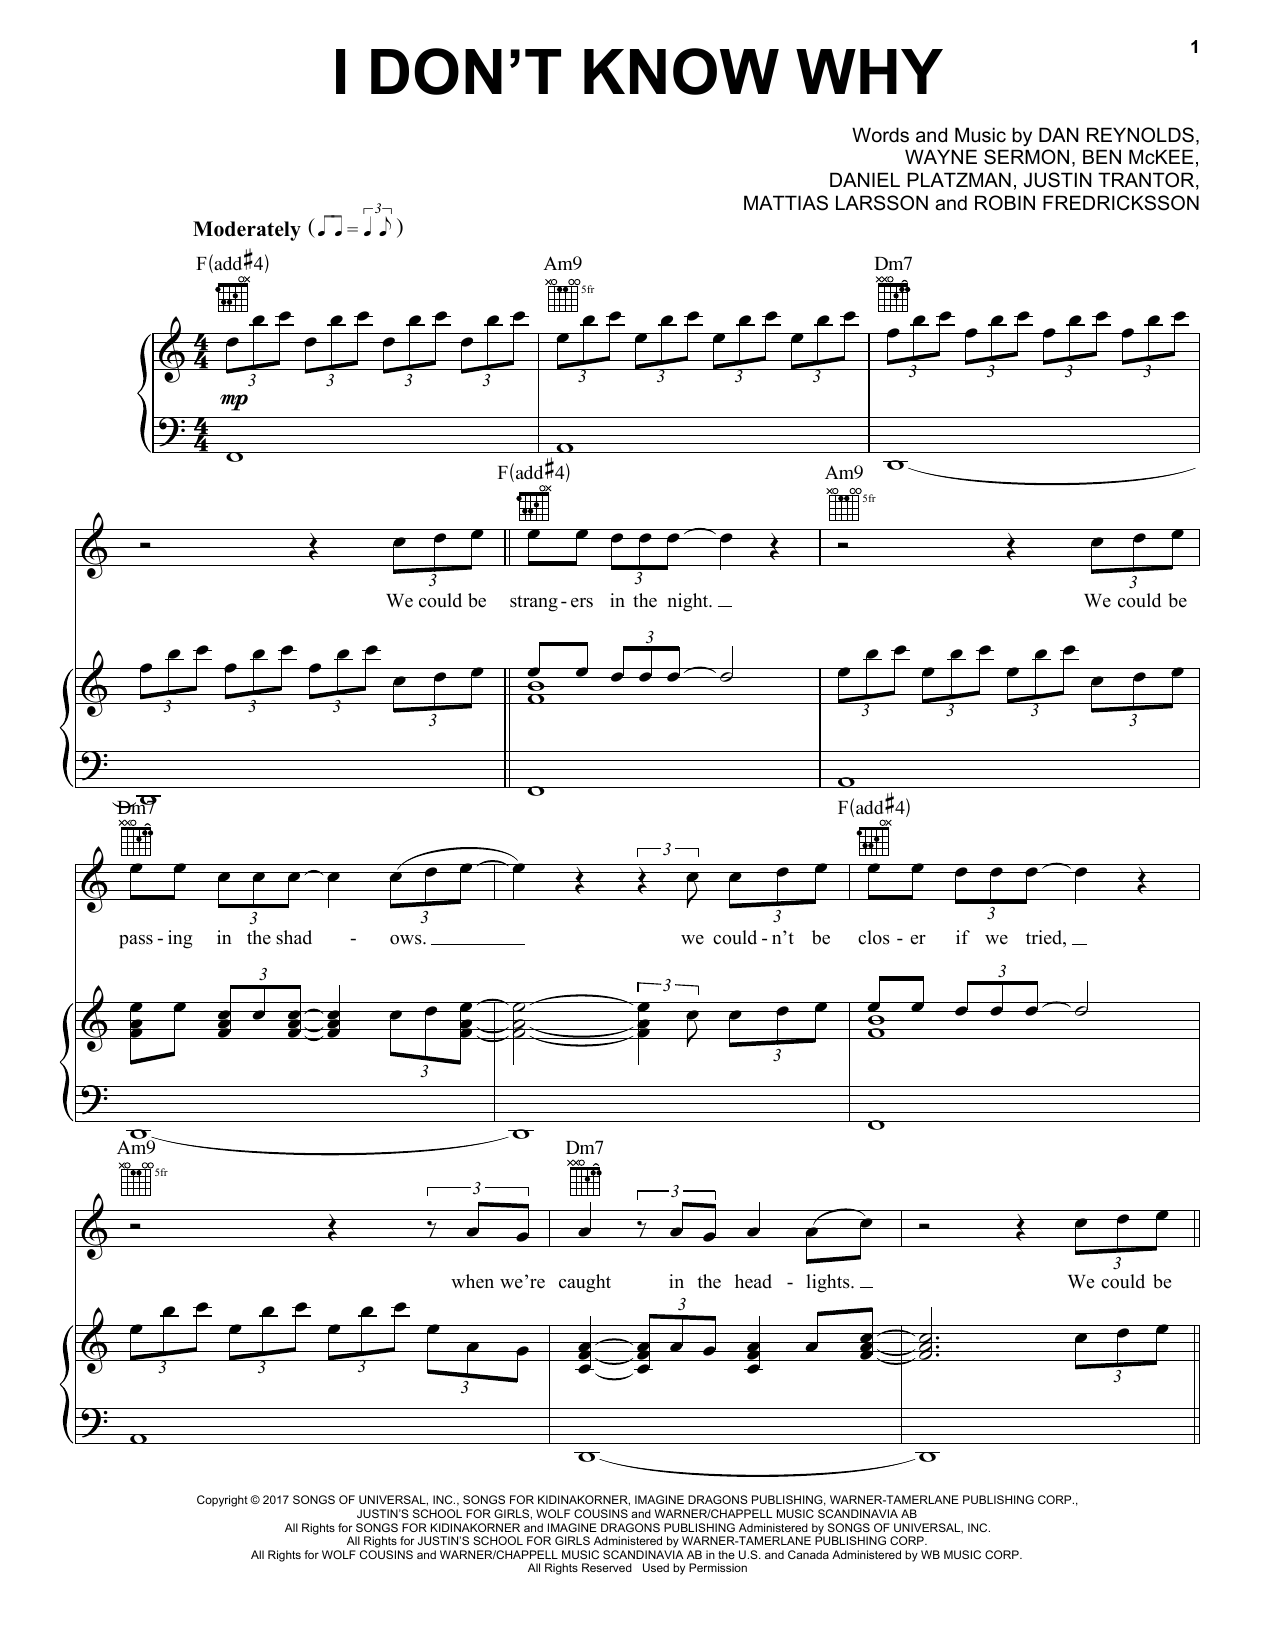 Download Imagine Dragons I Don't Know Why Sheet Music